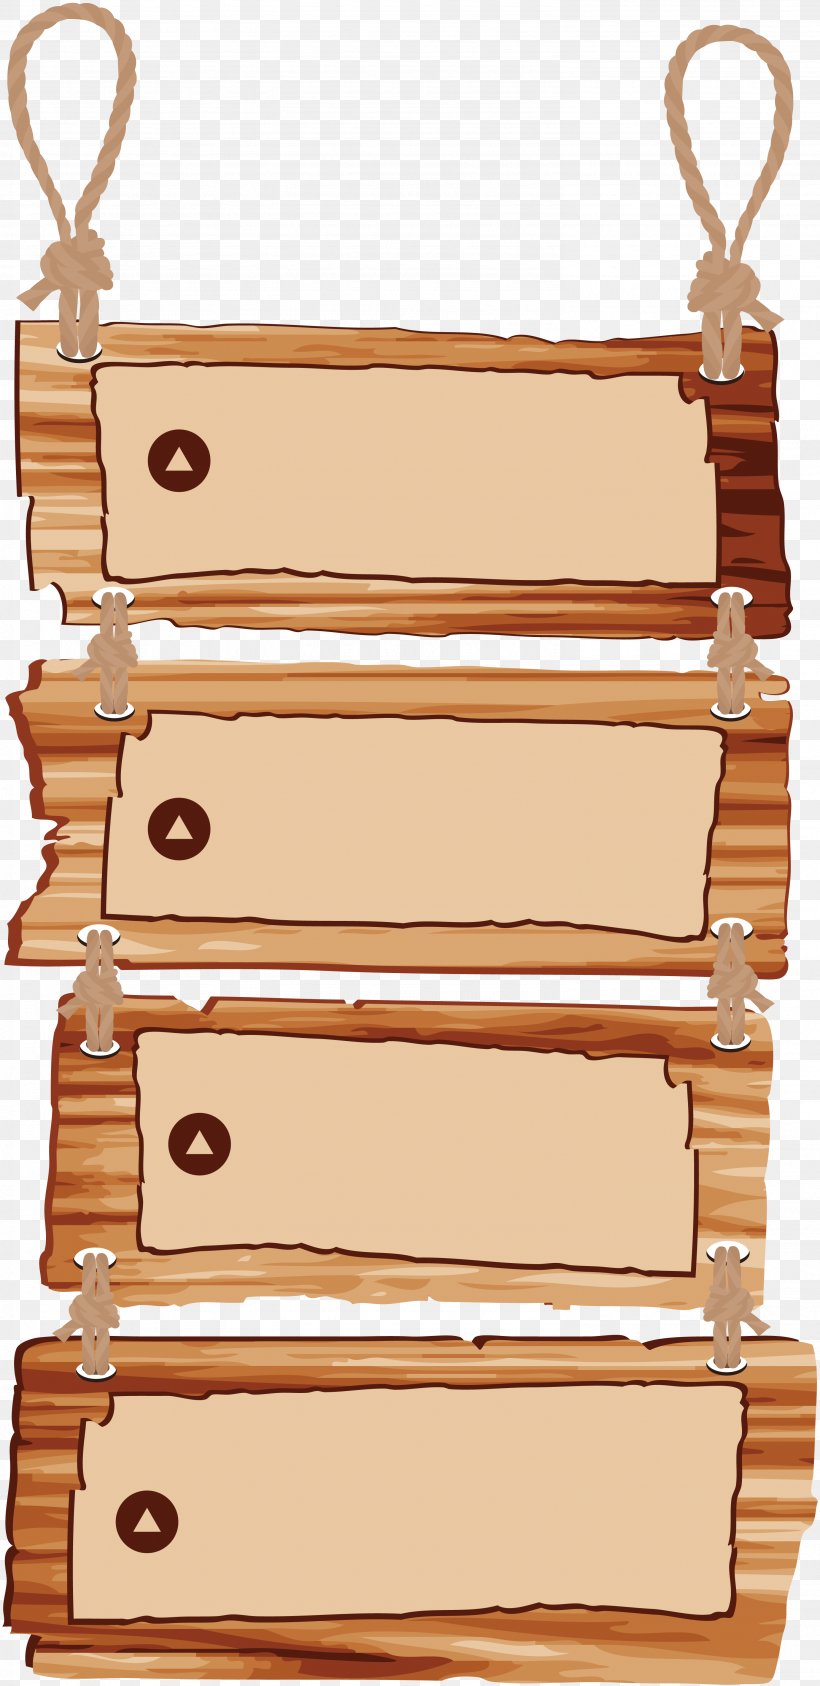 Wood Bohle Tablet Clip Art, PNG, 2976x6122px, Wood, Android, Beige, Bohle, Clipboard Download Free